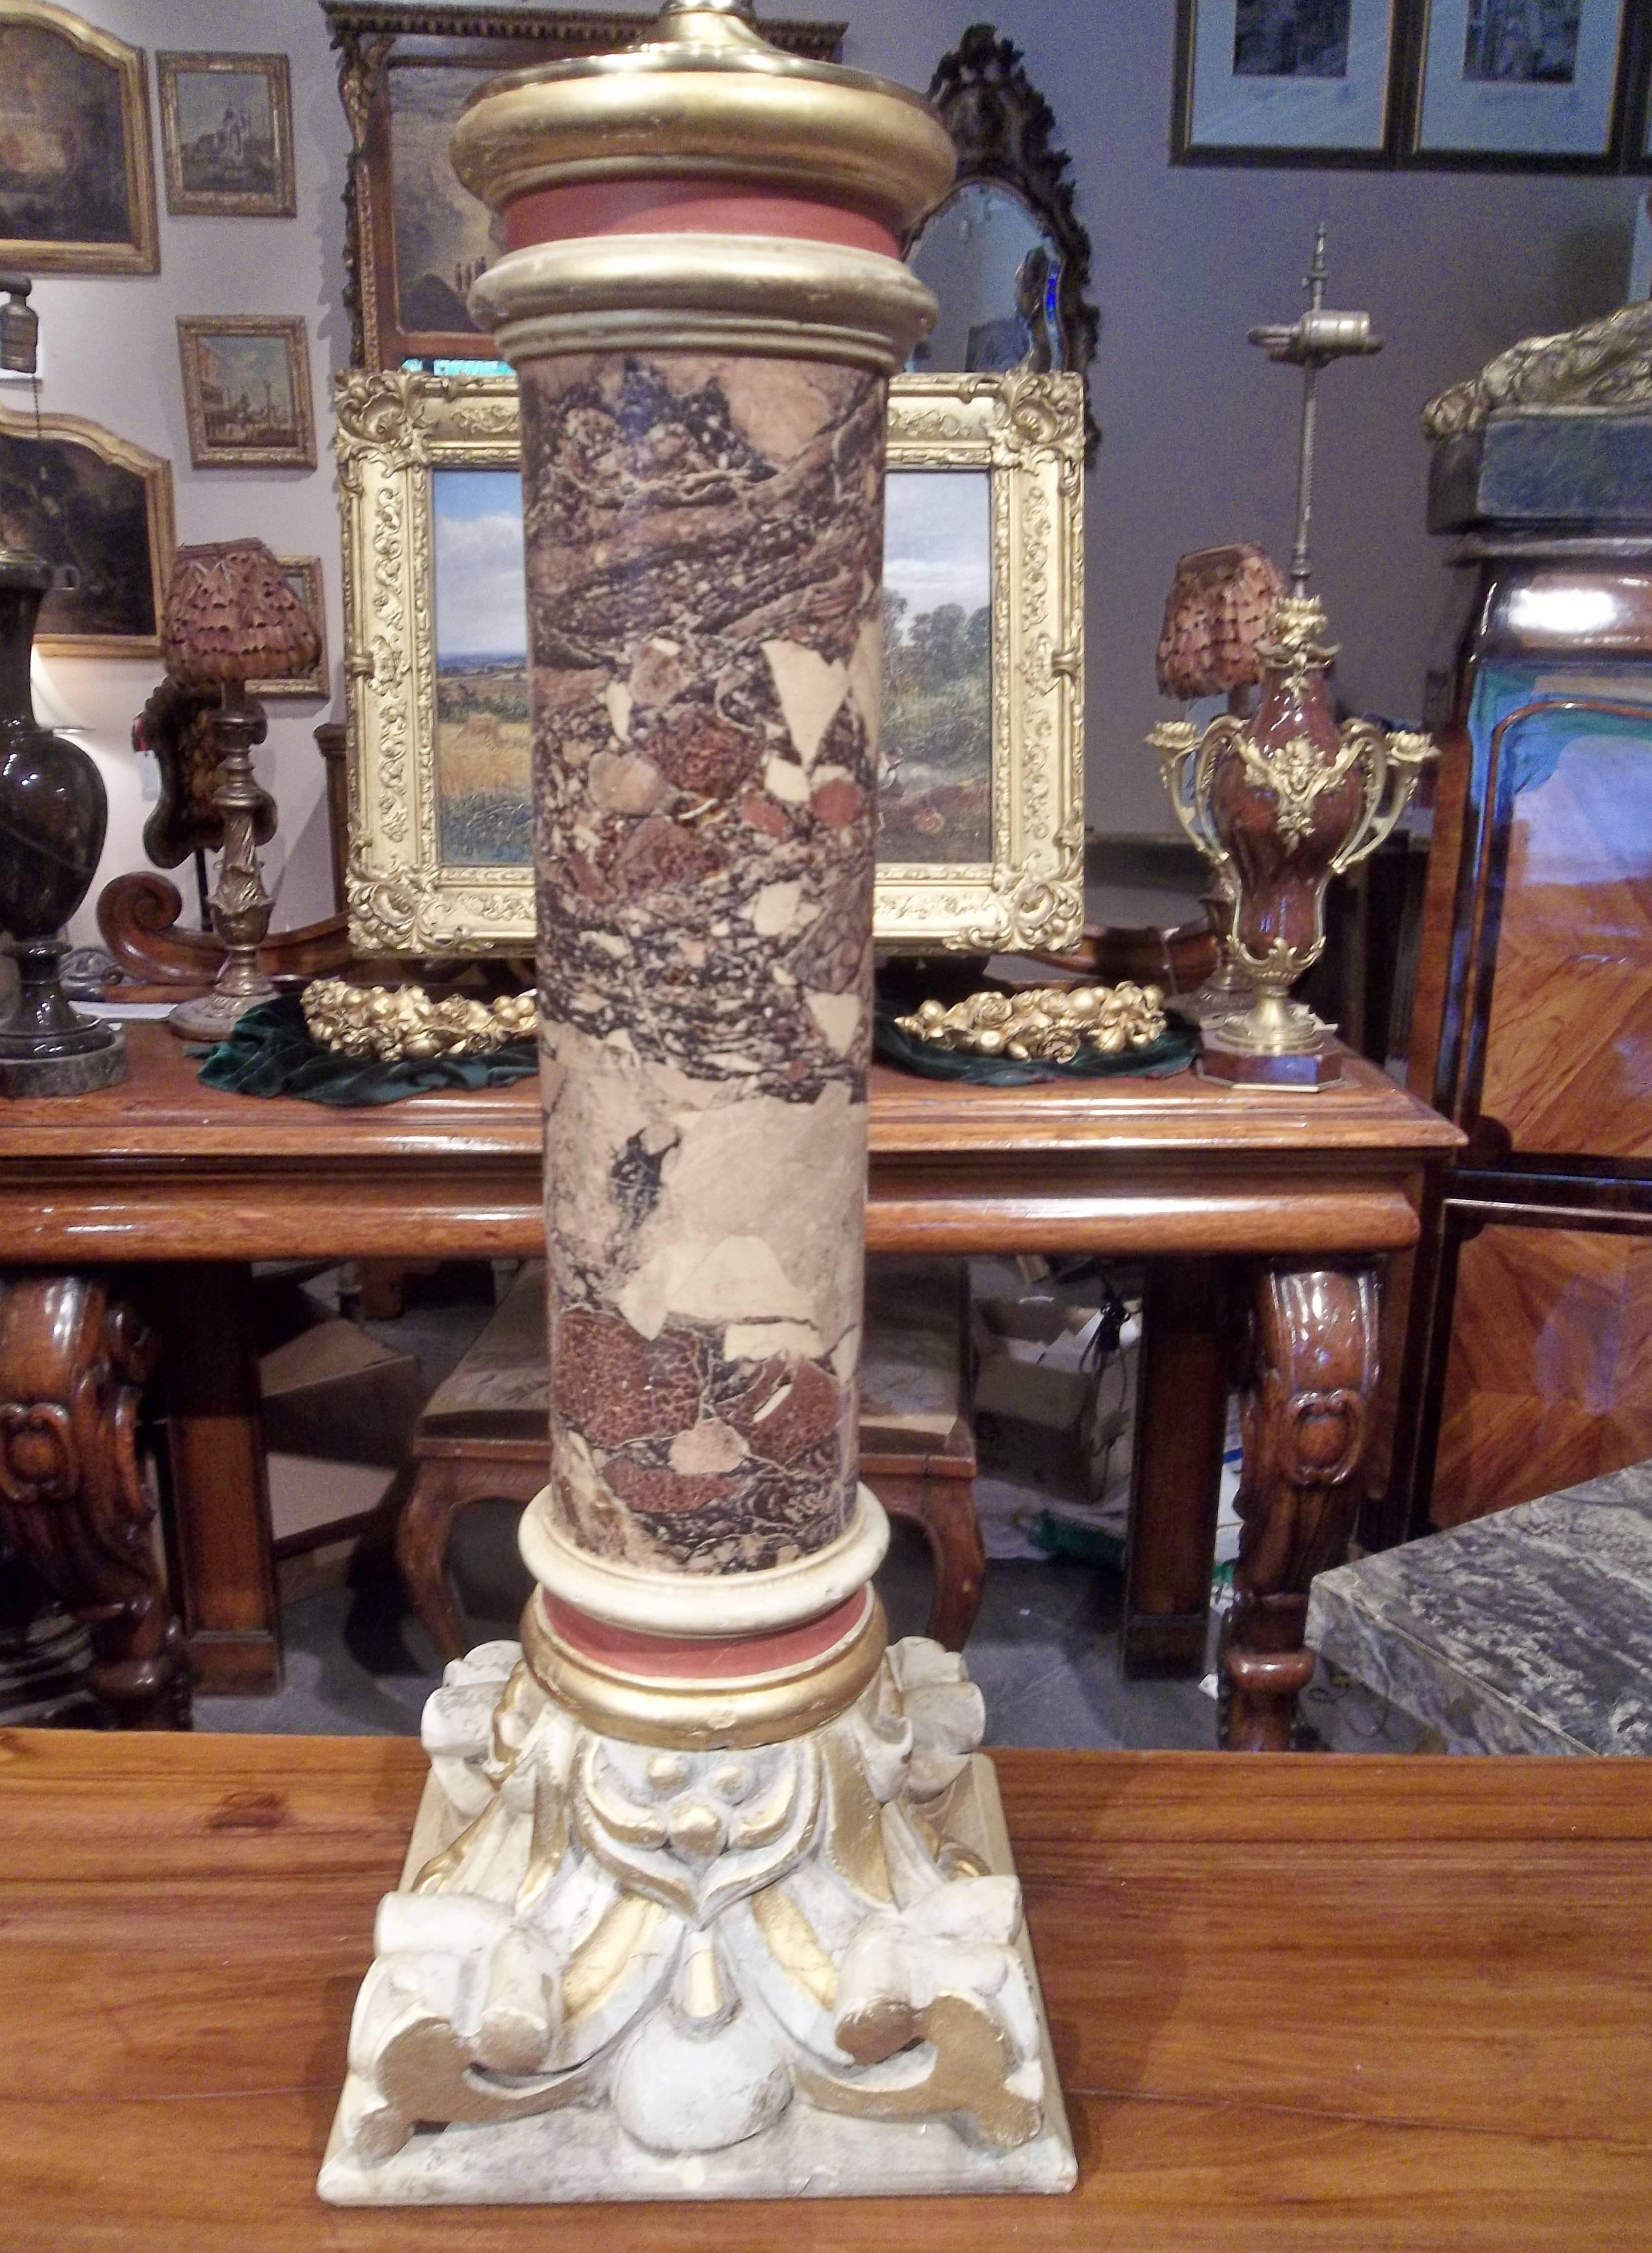 An imitation marble pattern applied to baluster (probably altar support) with red and gilt highlights. Possibly painted or transfer design.

Minor chips to the marble pattern. Chips and touchups to the gilt highlights.
Dings, dirt and expected wear